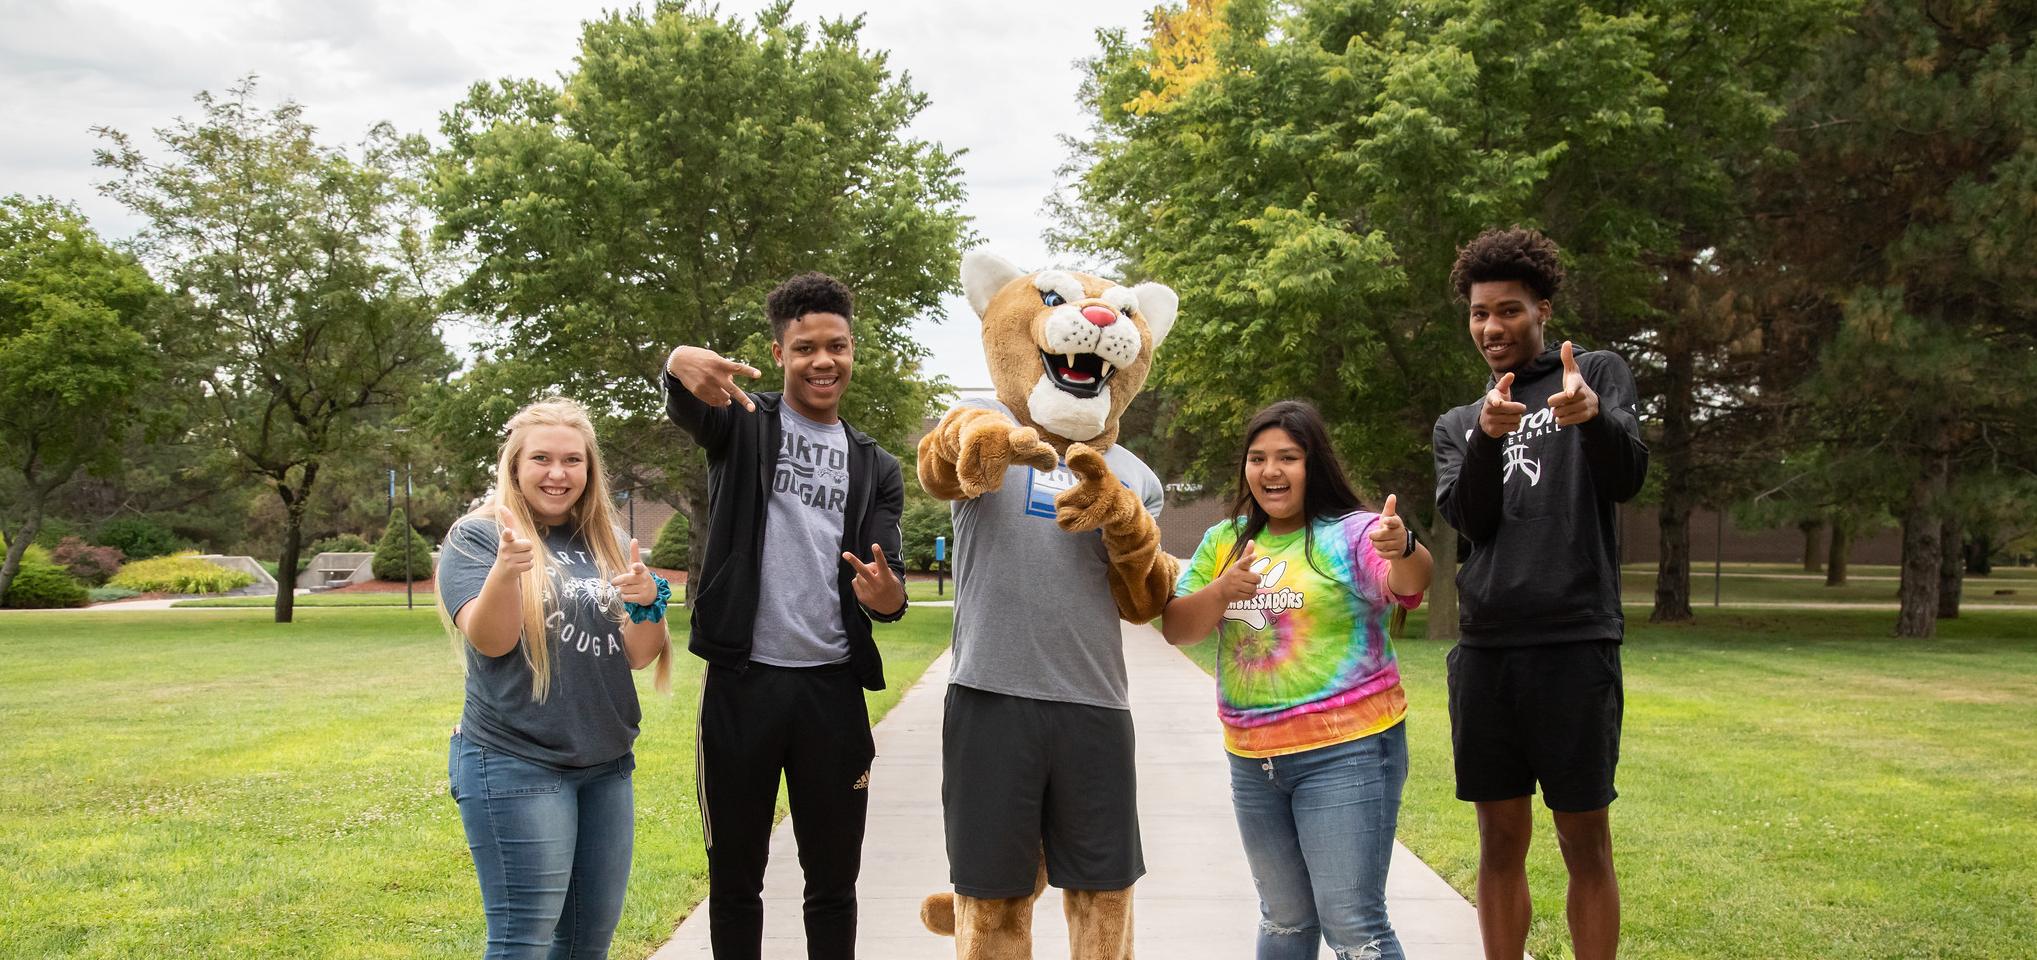 Bart hangs out with students on campus